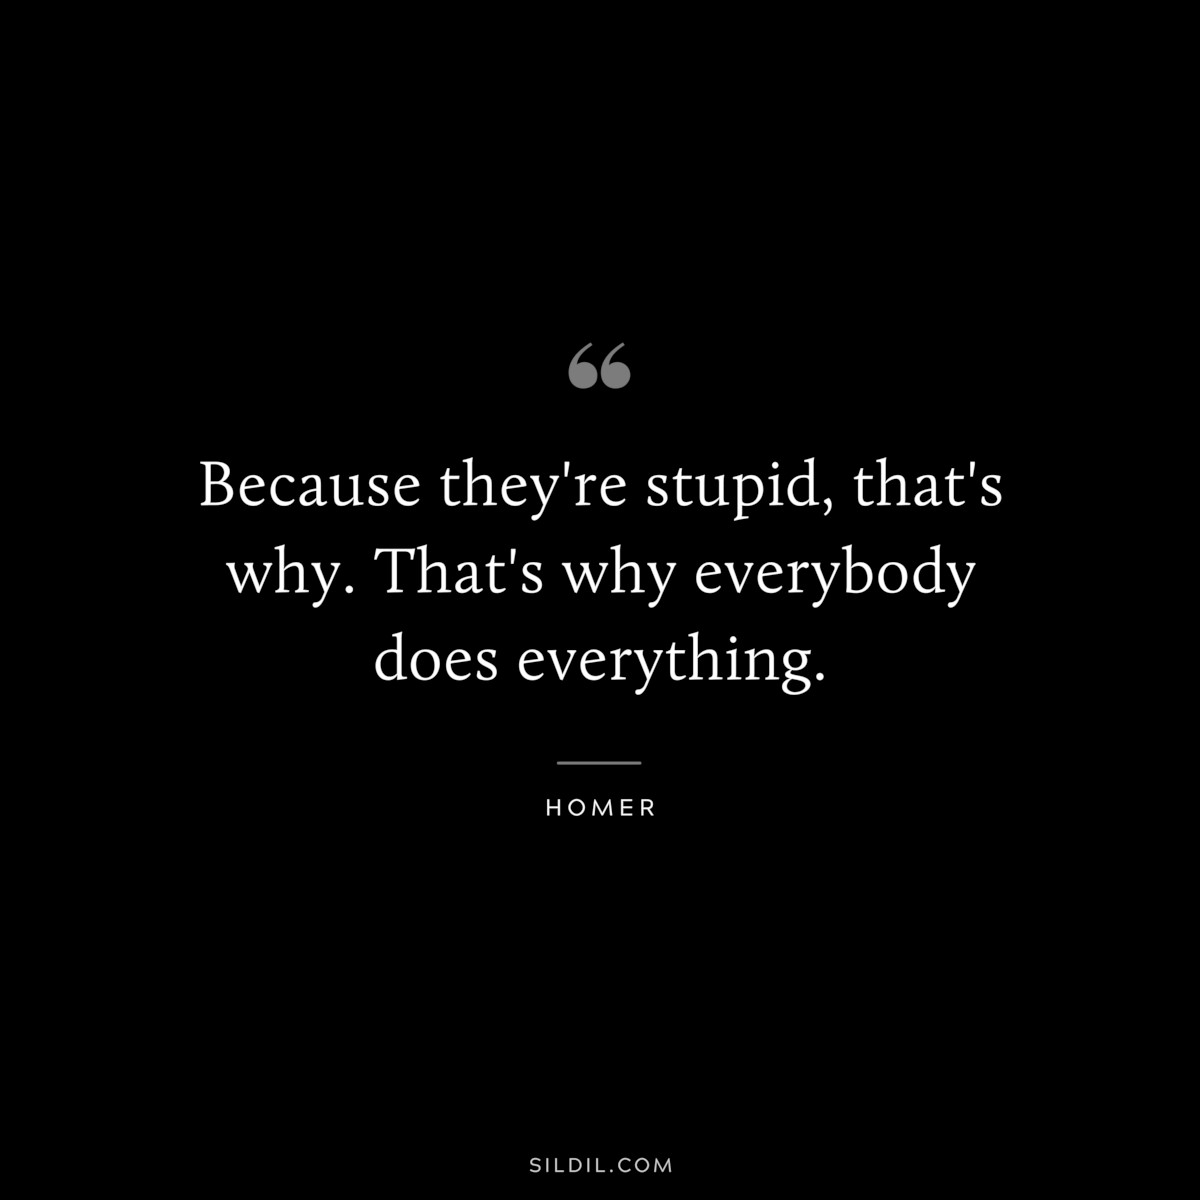 Because they're stupid, that's why. That's why everybody does everything. ― Homer